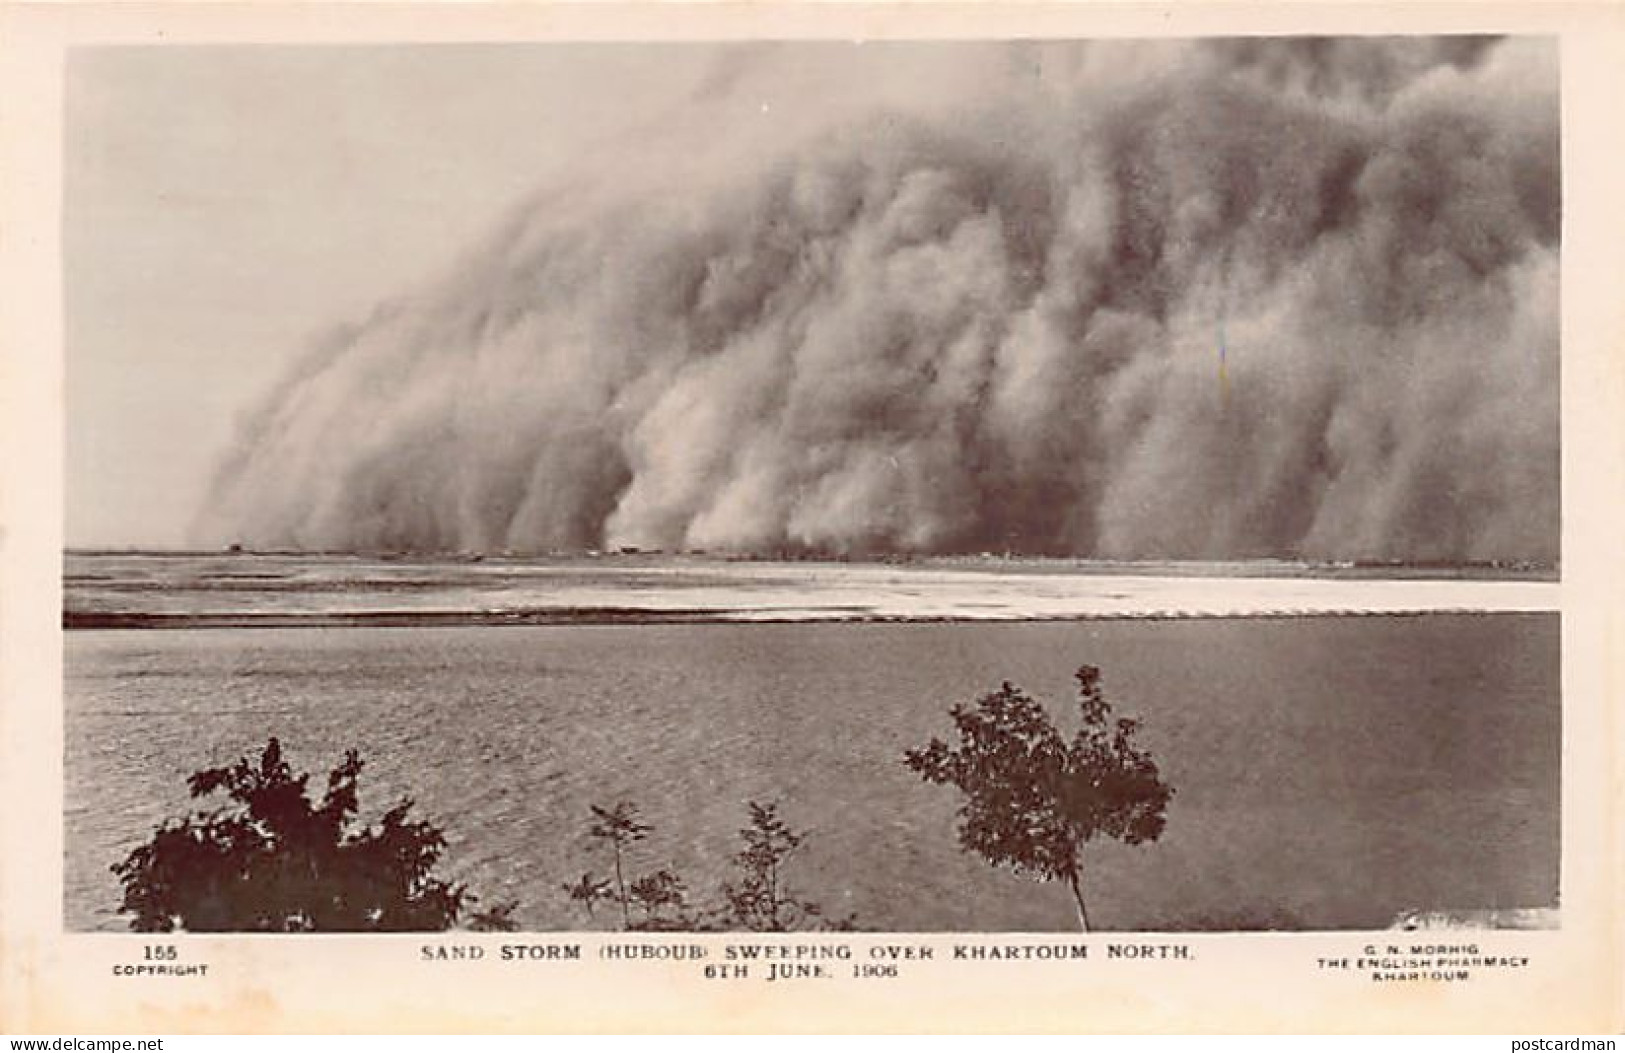 Sudan - Sand Storm Sweeping Over Khartoum North, 6th June 1906 - REAL PHOTO Publ. G. N. Mohring 155 - Sudán